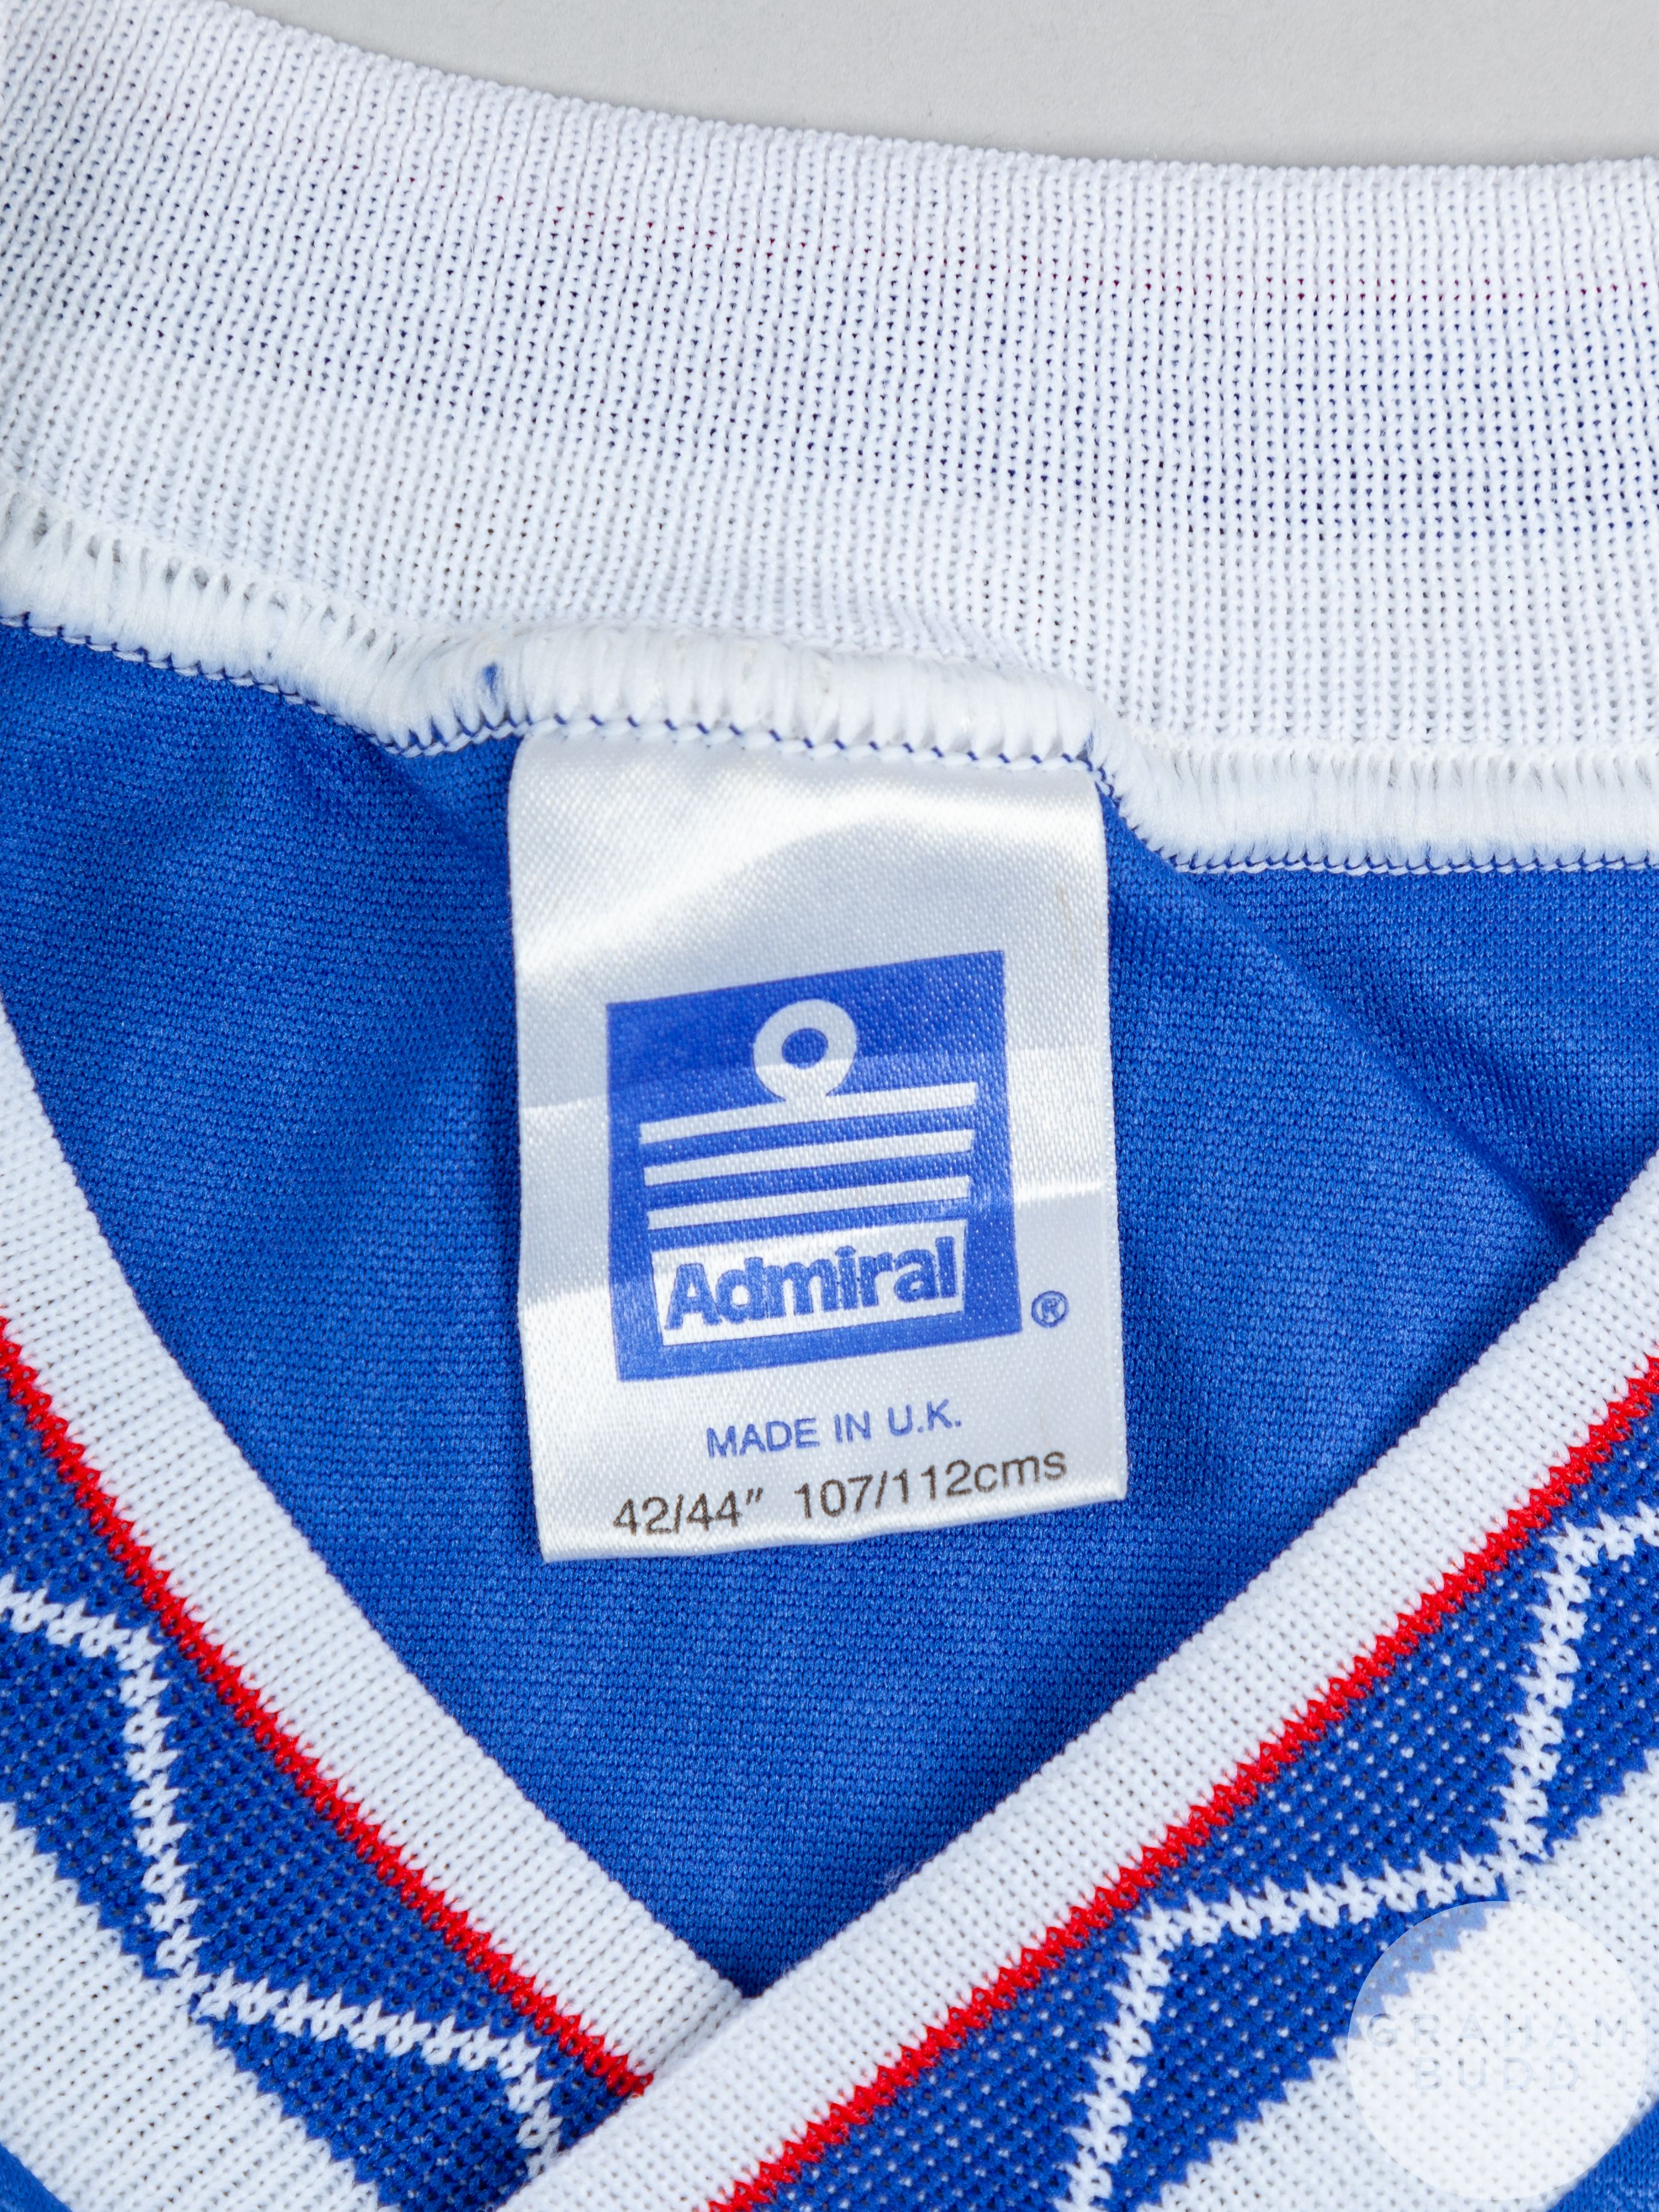 Blue and white No.11 Rangers v. Airdrieonians Scottish Cup Final shirt - Image 4 of 4